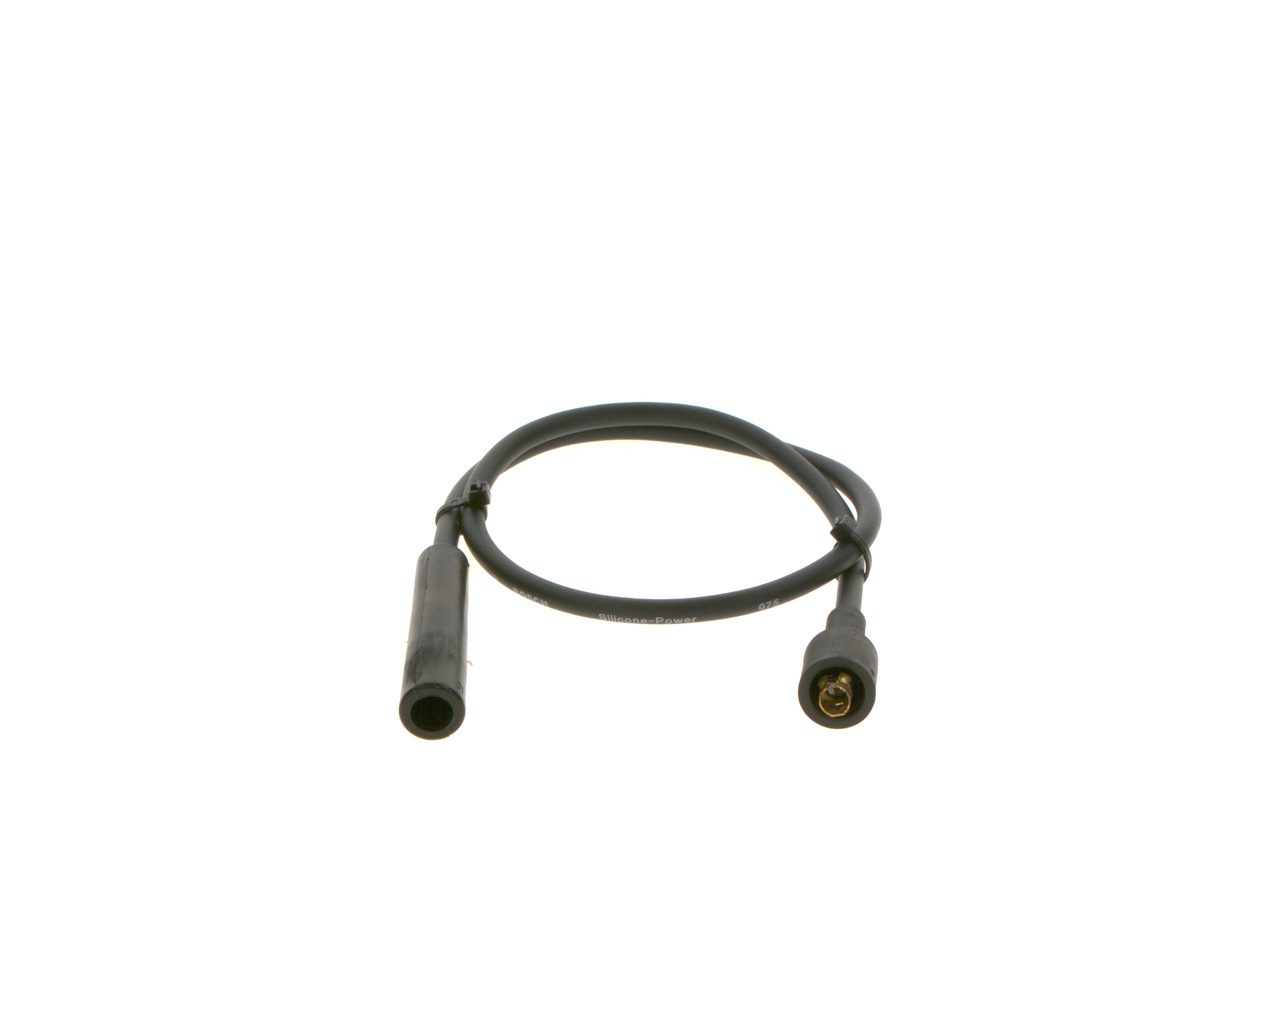 Fiesta Mk1 Van (WFVT) Ignition and preheating parts - Ignition Cable Kit BOSCH 0 986 356 880